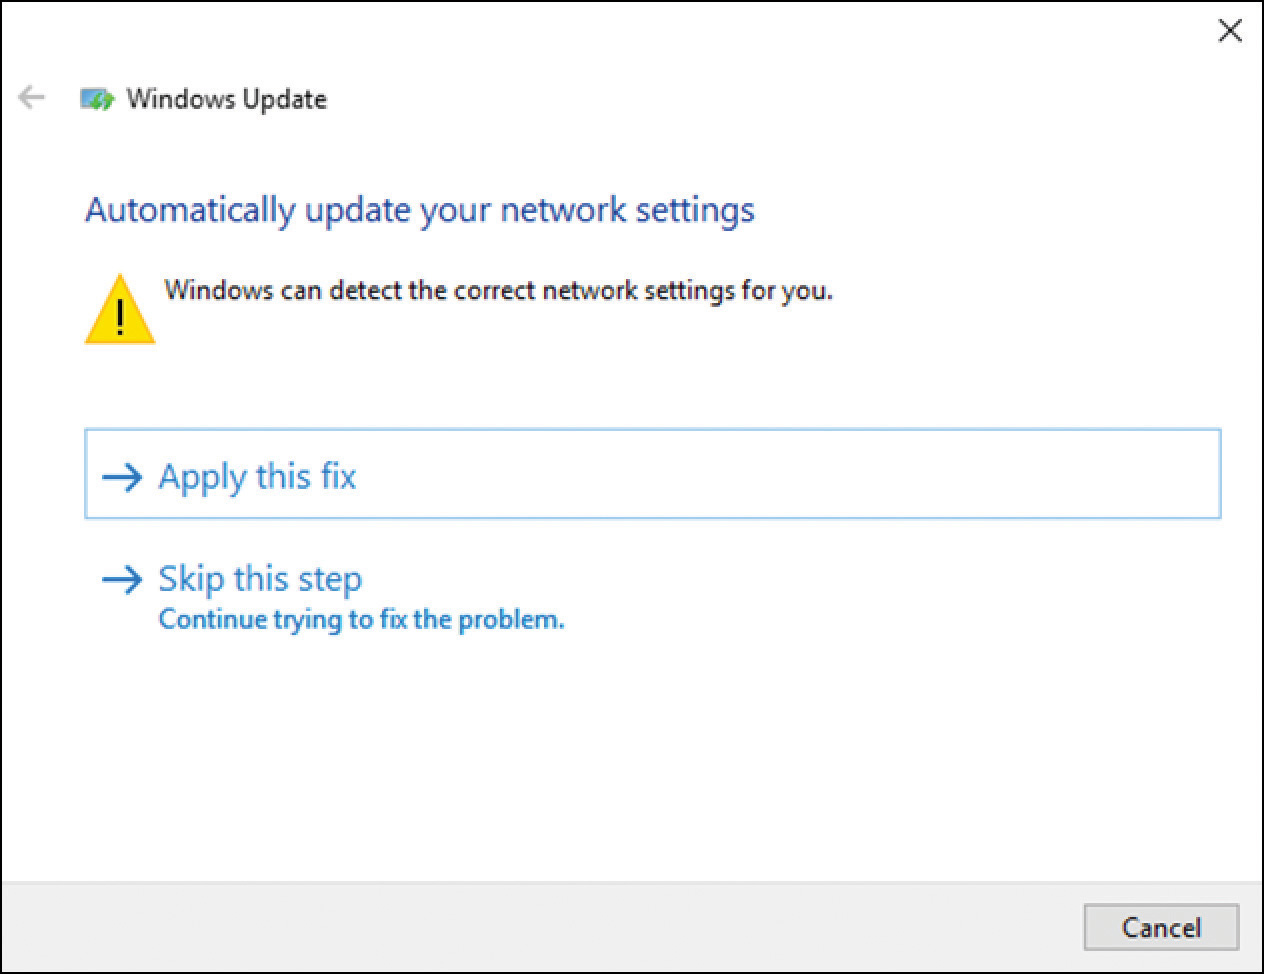 A screenshot shows the Windows Update Troubleshooting wizard. Problems have been detected with network settings, and the troubleshooter is prompting the user to apply this fix.   